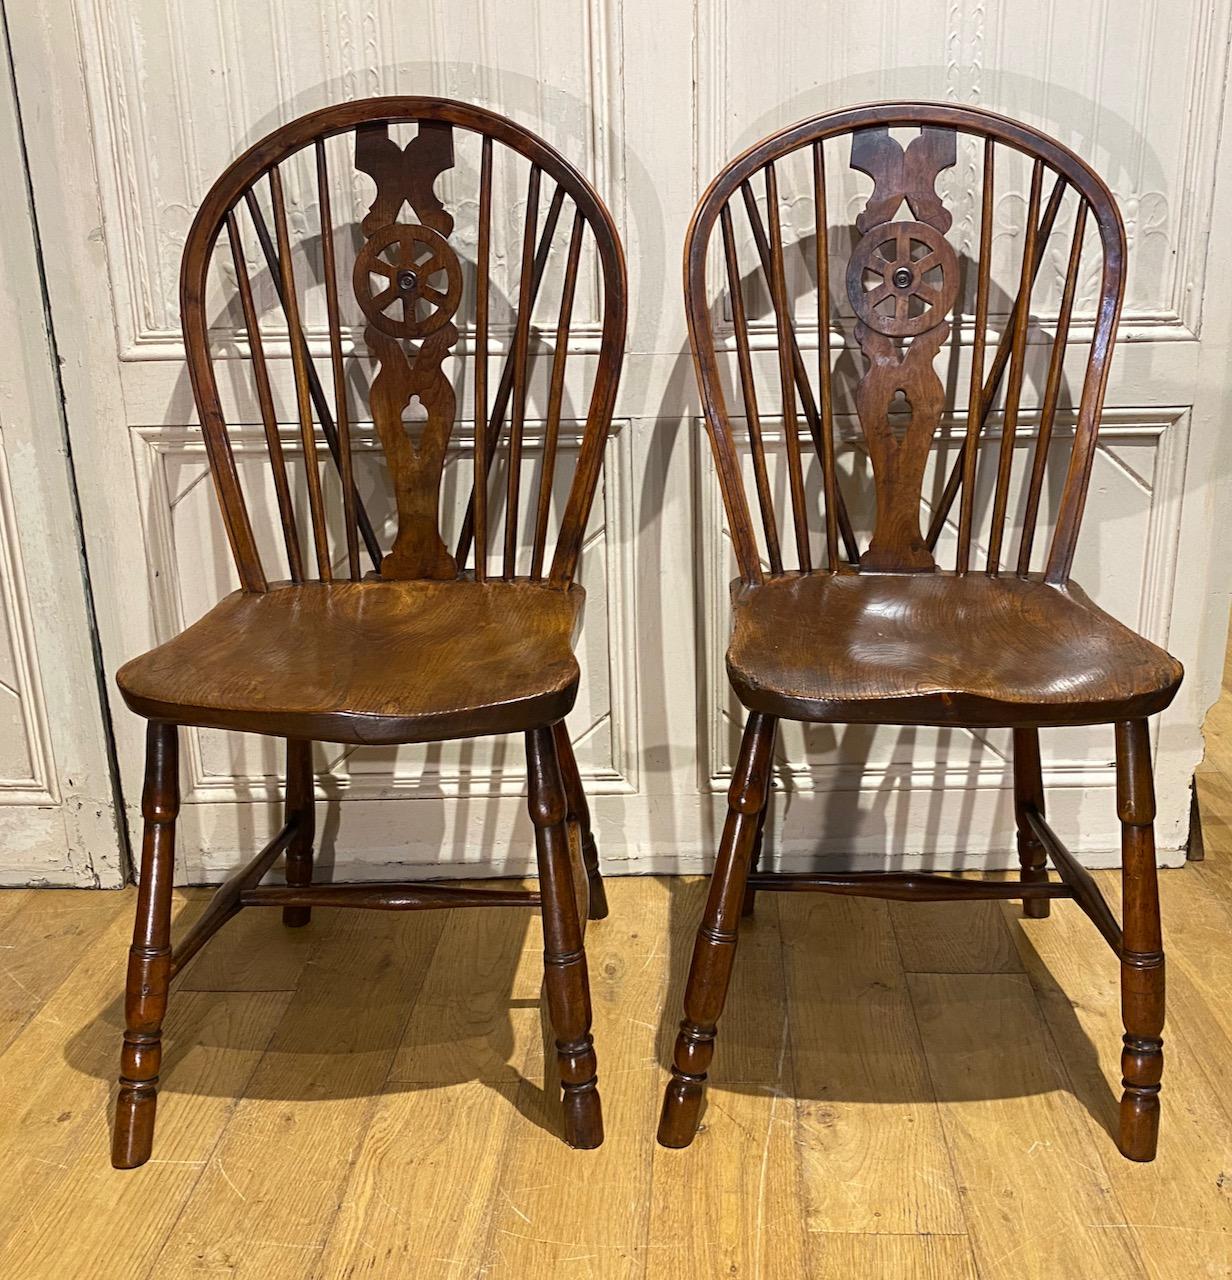 Pair of Yew Wood Wheel Back Chairs